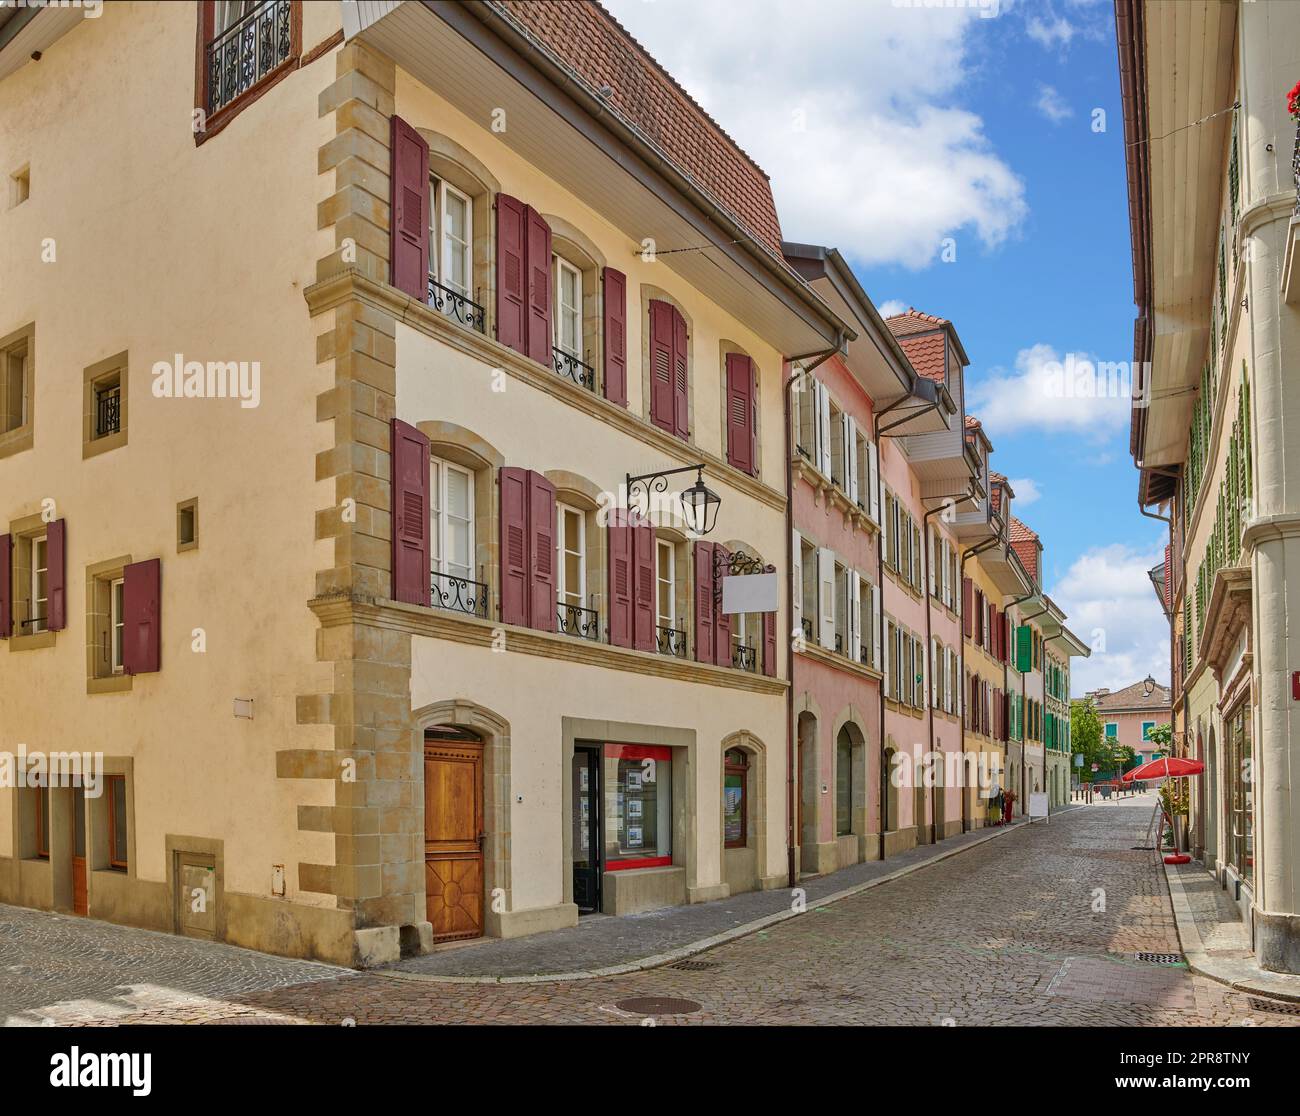 Street view of old buildings in a historic city with built medieval architecture and a cloudy blue sky in Annecy, France. Beautiful landscape of an empty small urban town with homes or houses Stock Photo